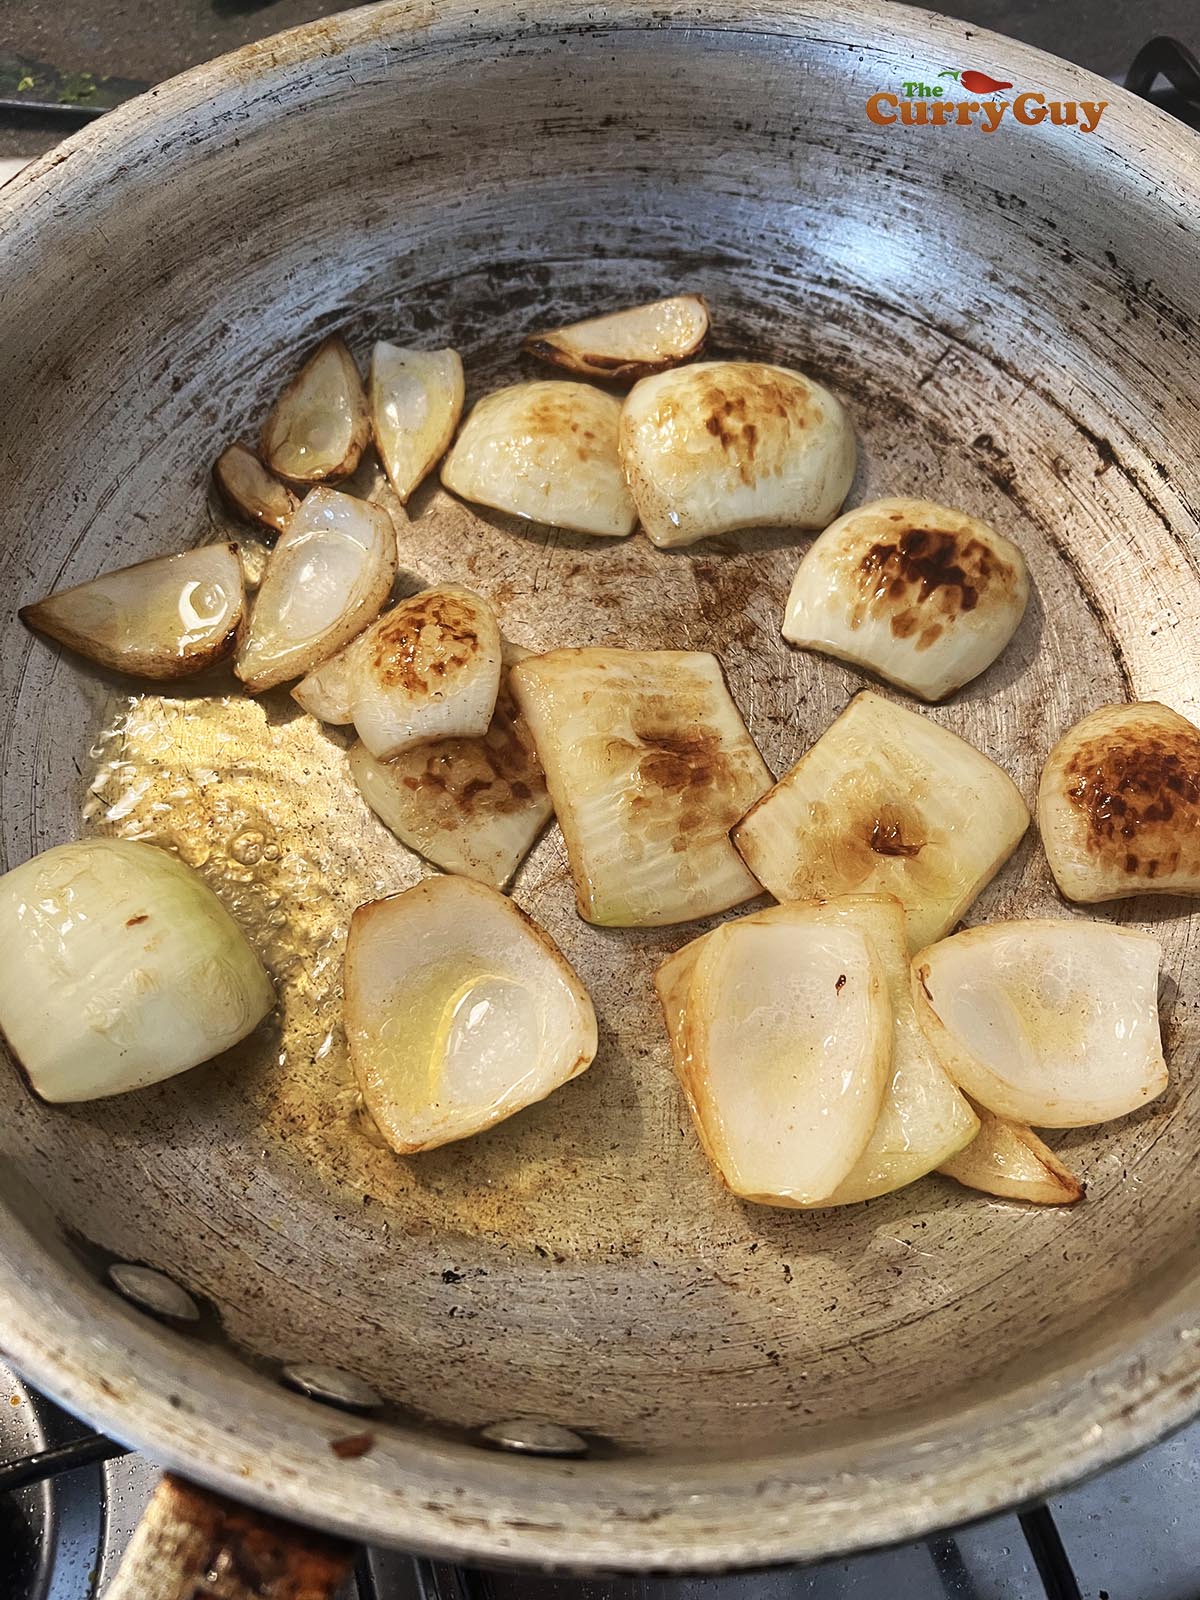 Charring the onion petals in the pan